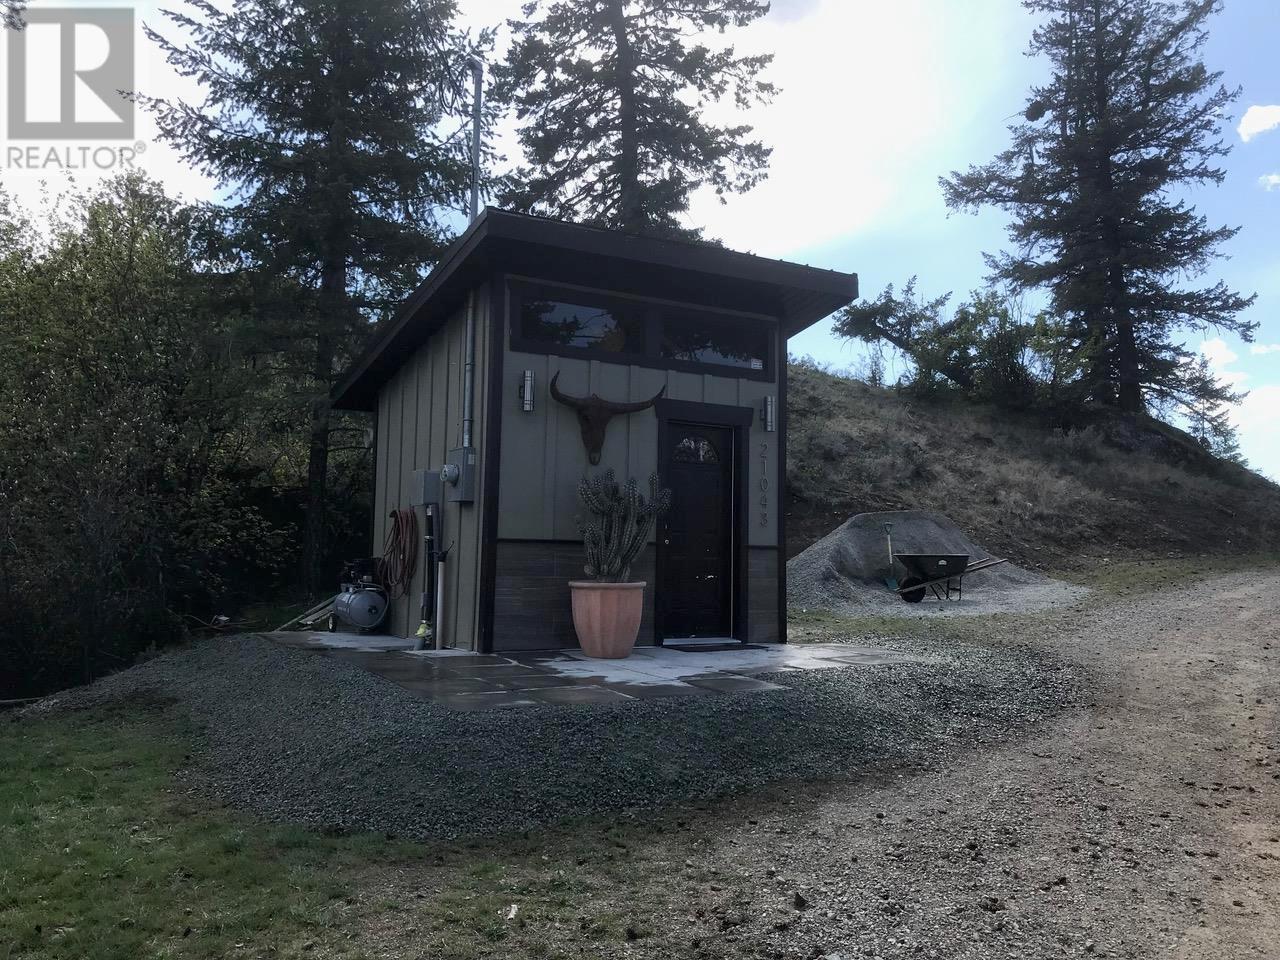  21043 Old Ritcher Passage Road, Osoyoos